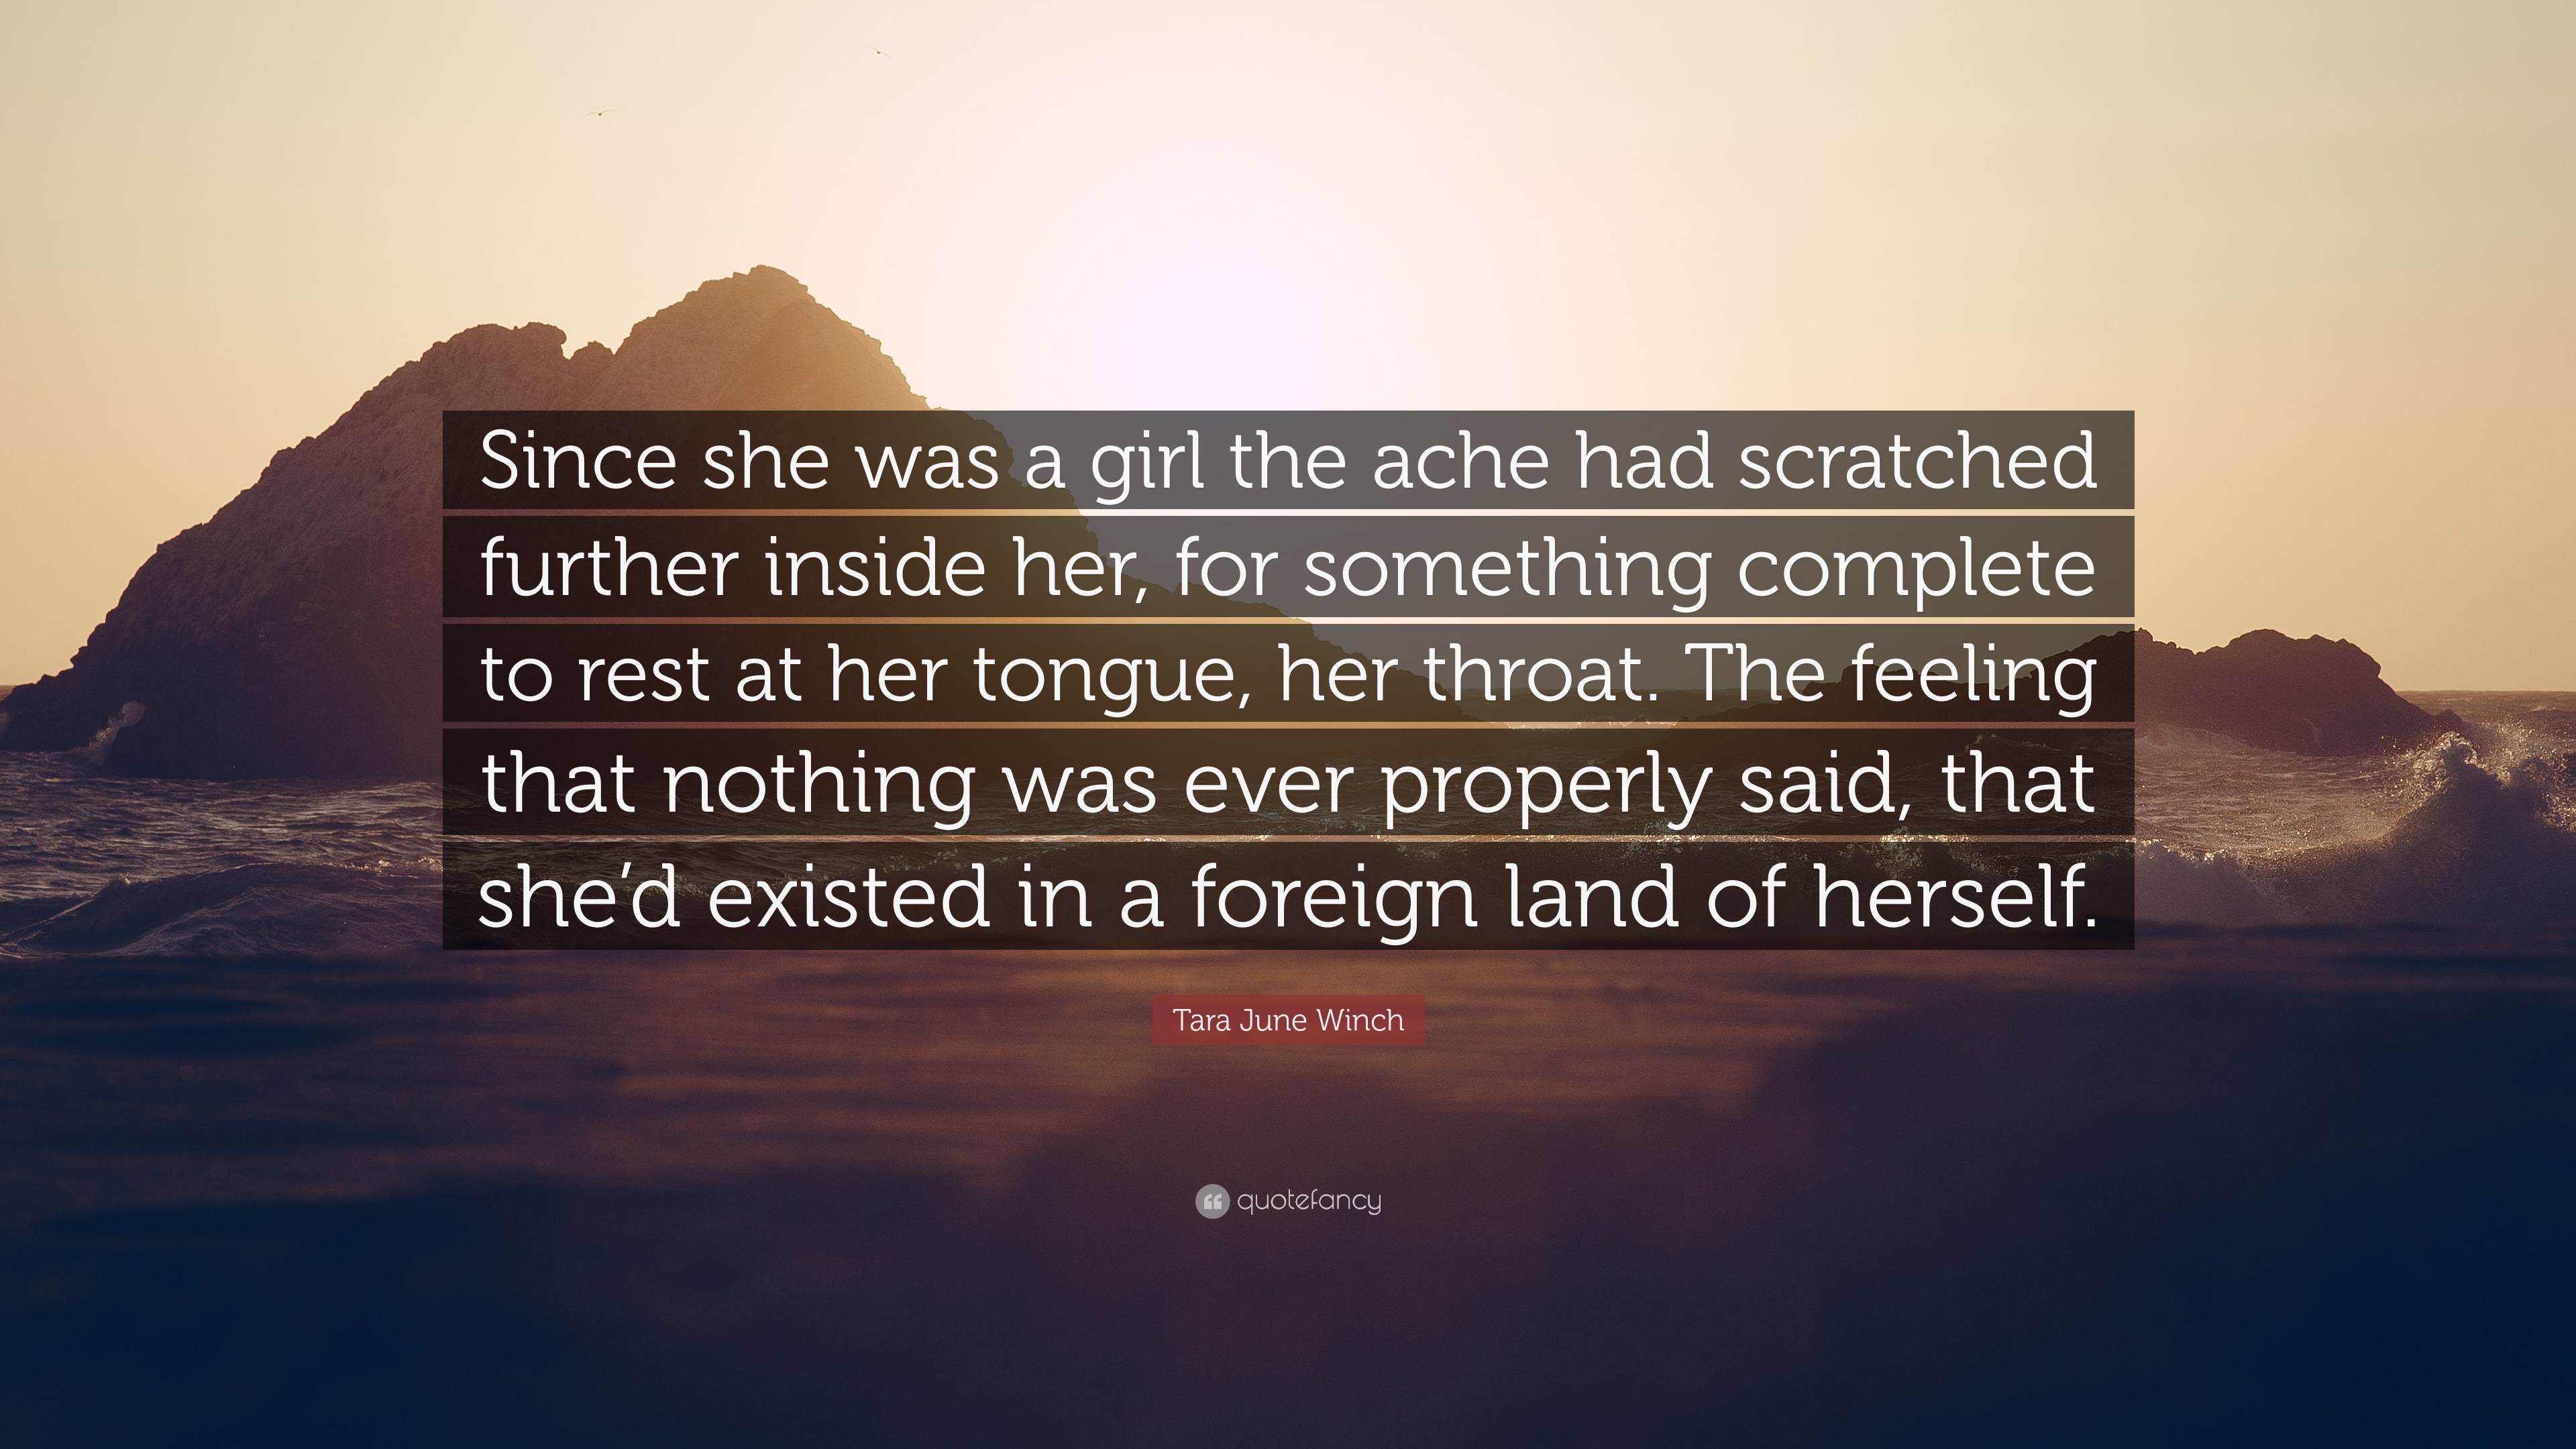 Tara June Winch Quote: “Since she was a girl the ache had scratched ...